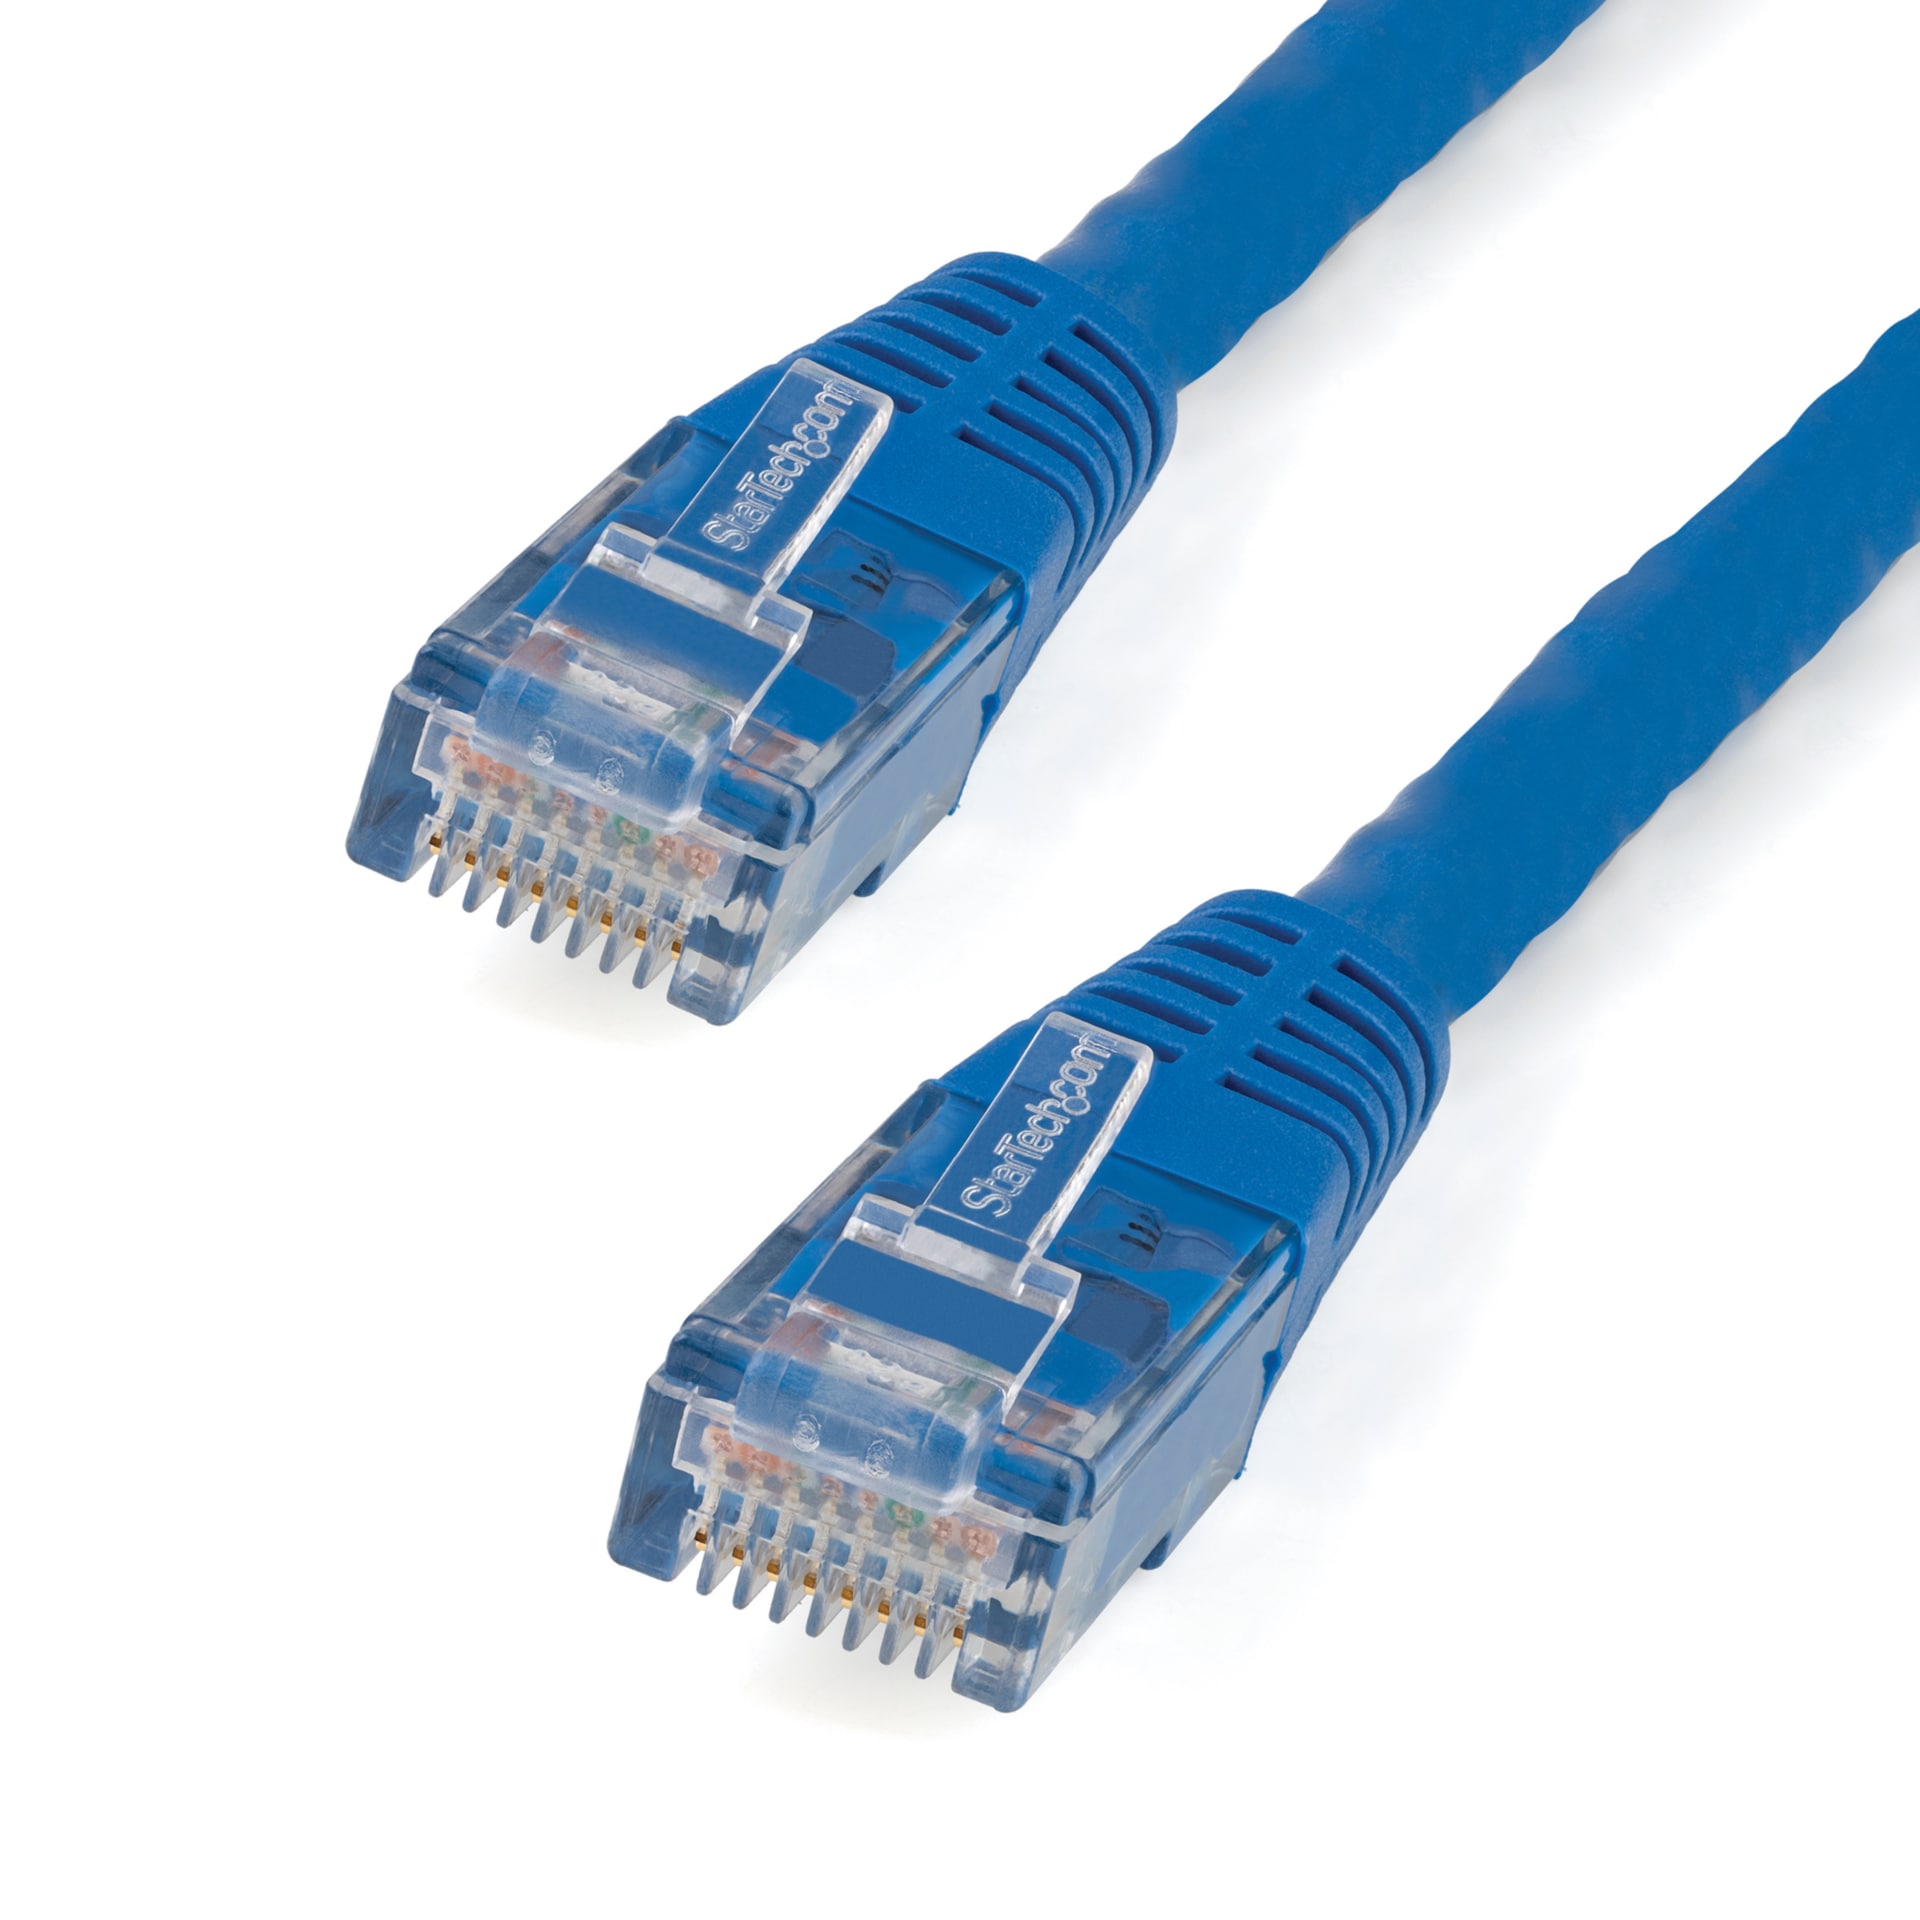 StarTech.com CAT6 Ethernet Cable 7' Blue 650MHz Molded Patch Cord PoE++